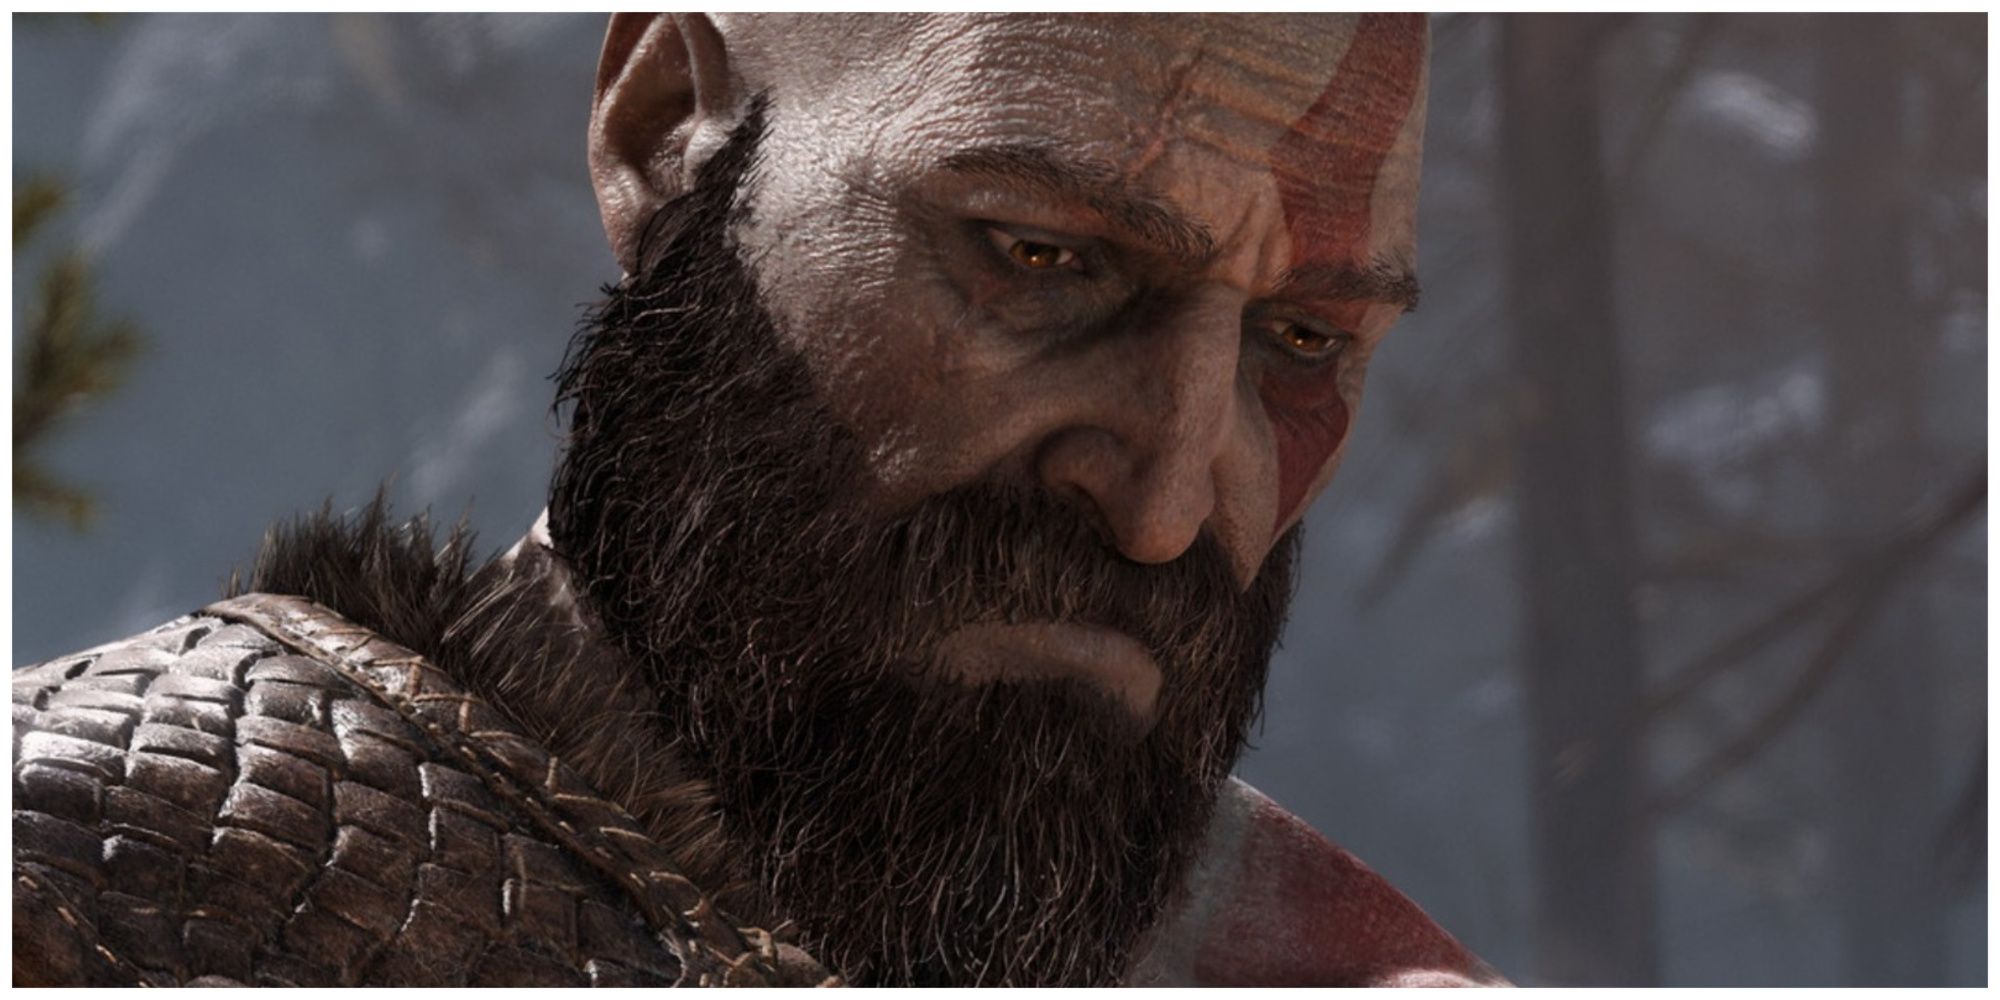 Kratos frowning in God of War